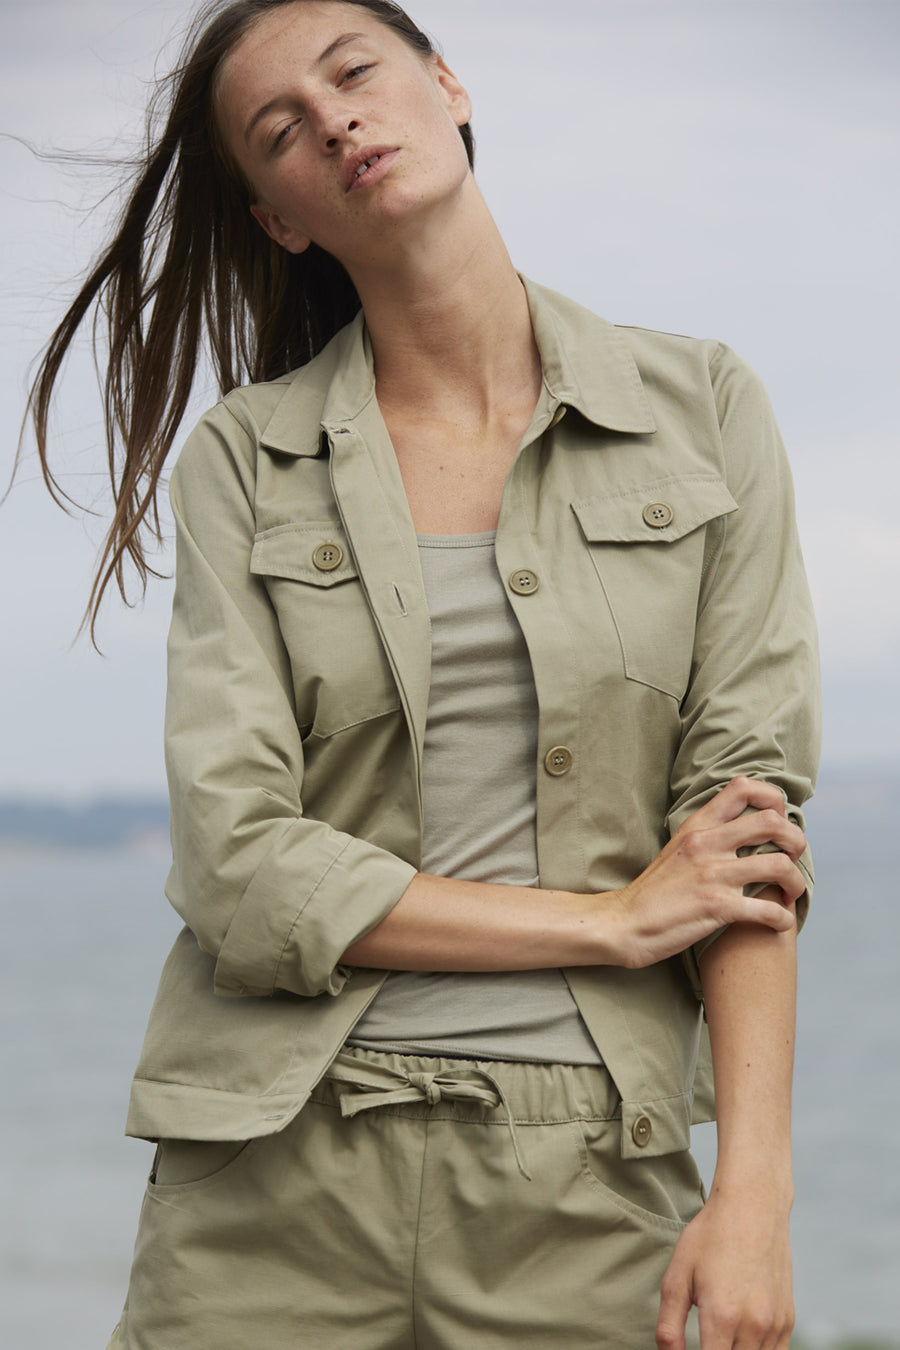 Utility style women's jacket in khaki made from organic linen cotton blend by The White Briefs